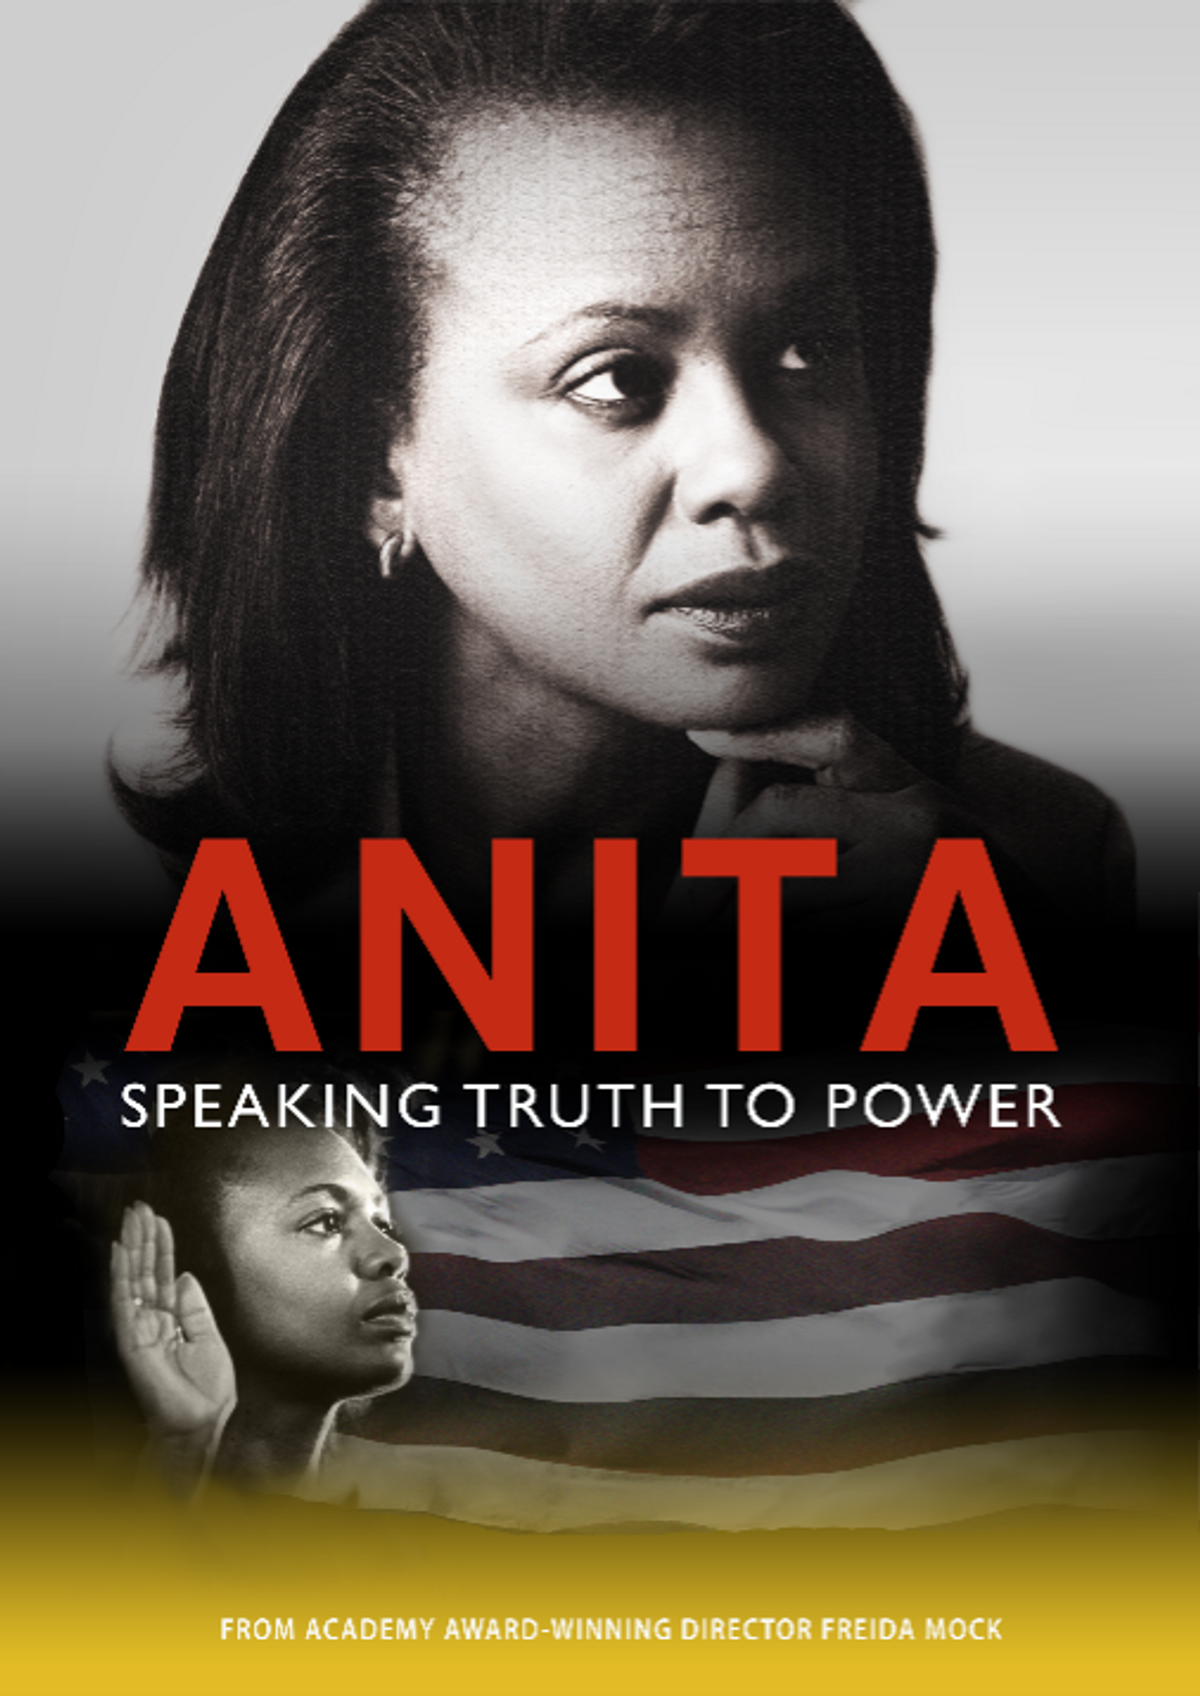 'ANITA': A Documentary Revisiting Race, Politics, And Sexual Harassment